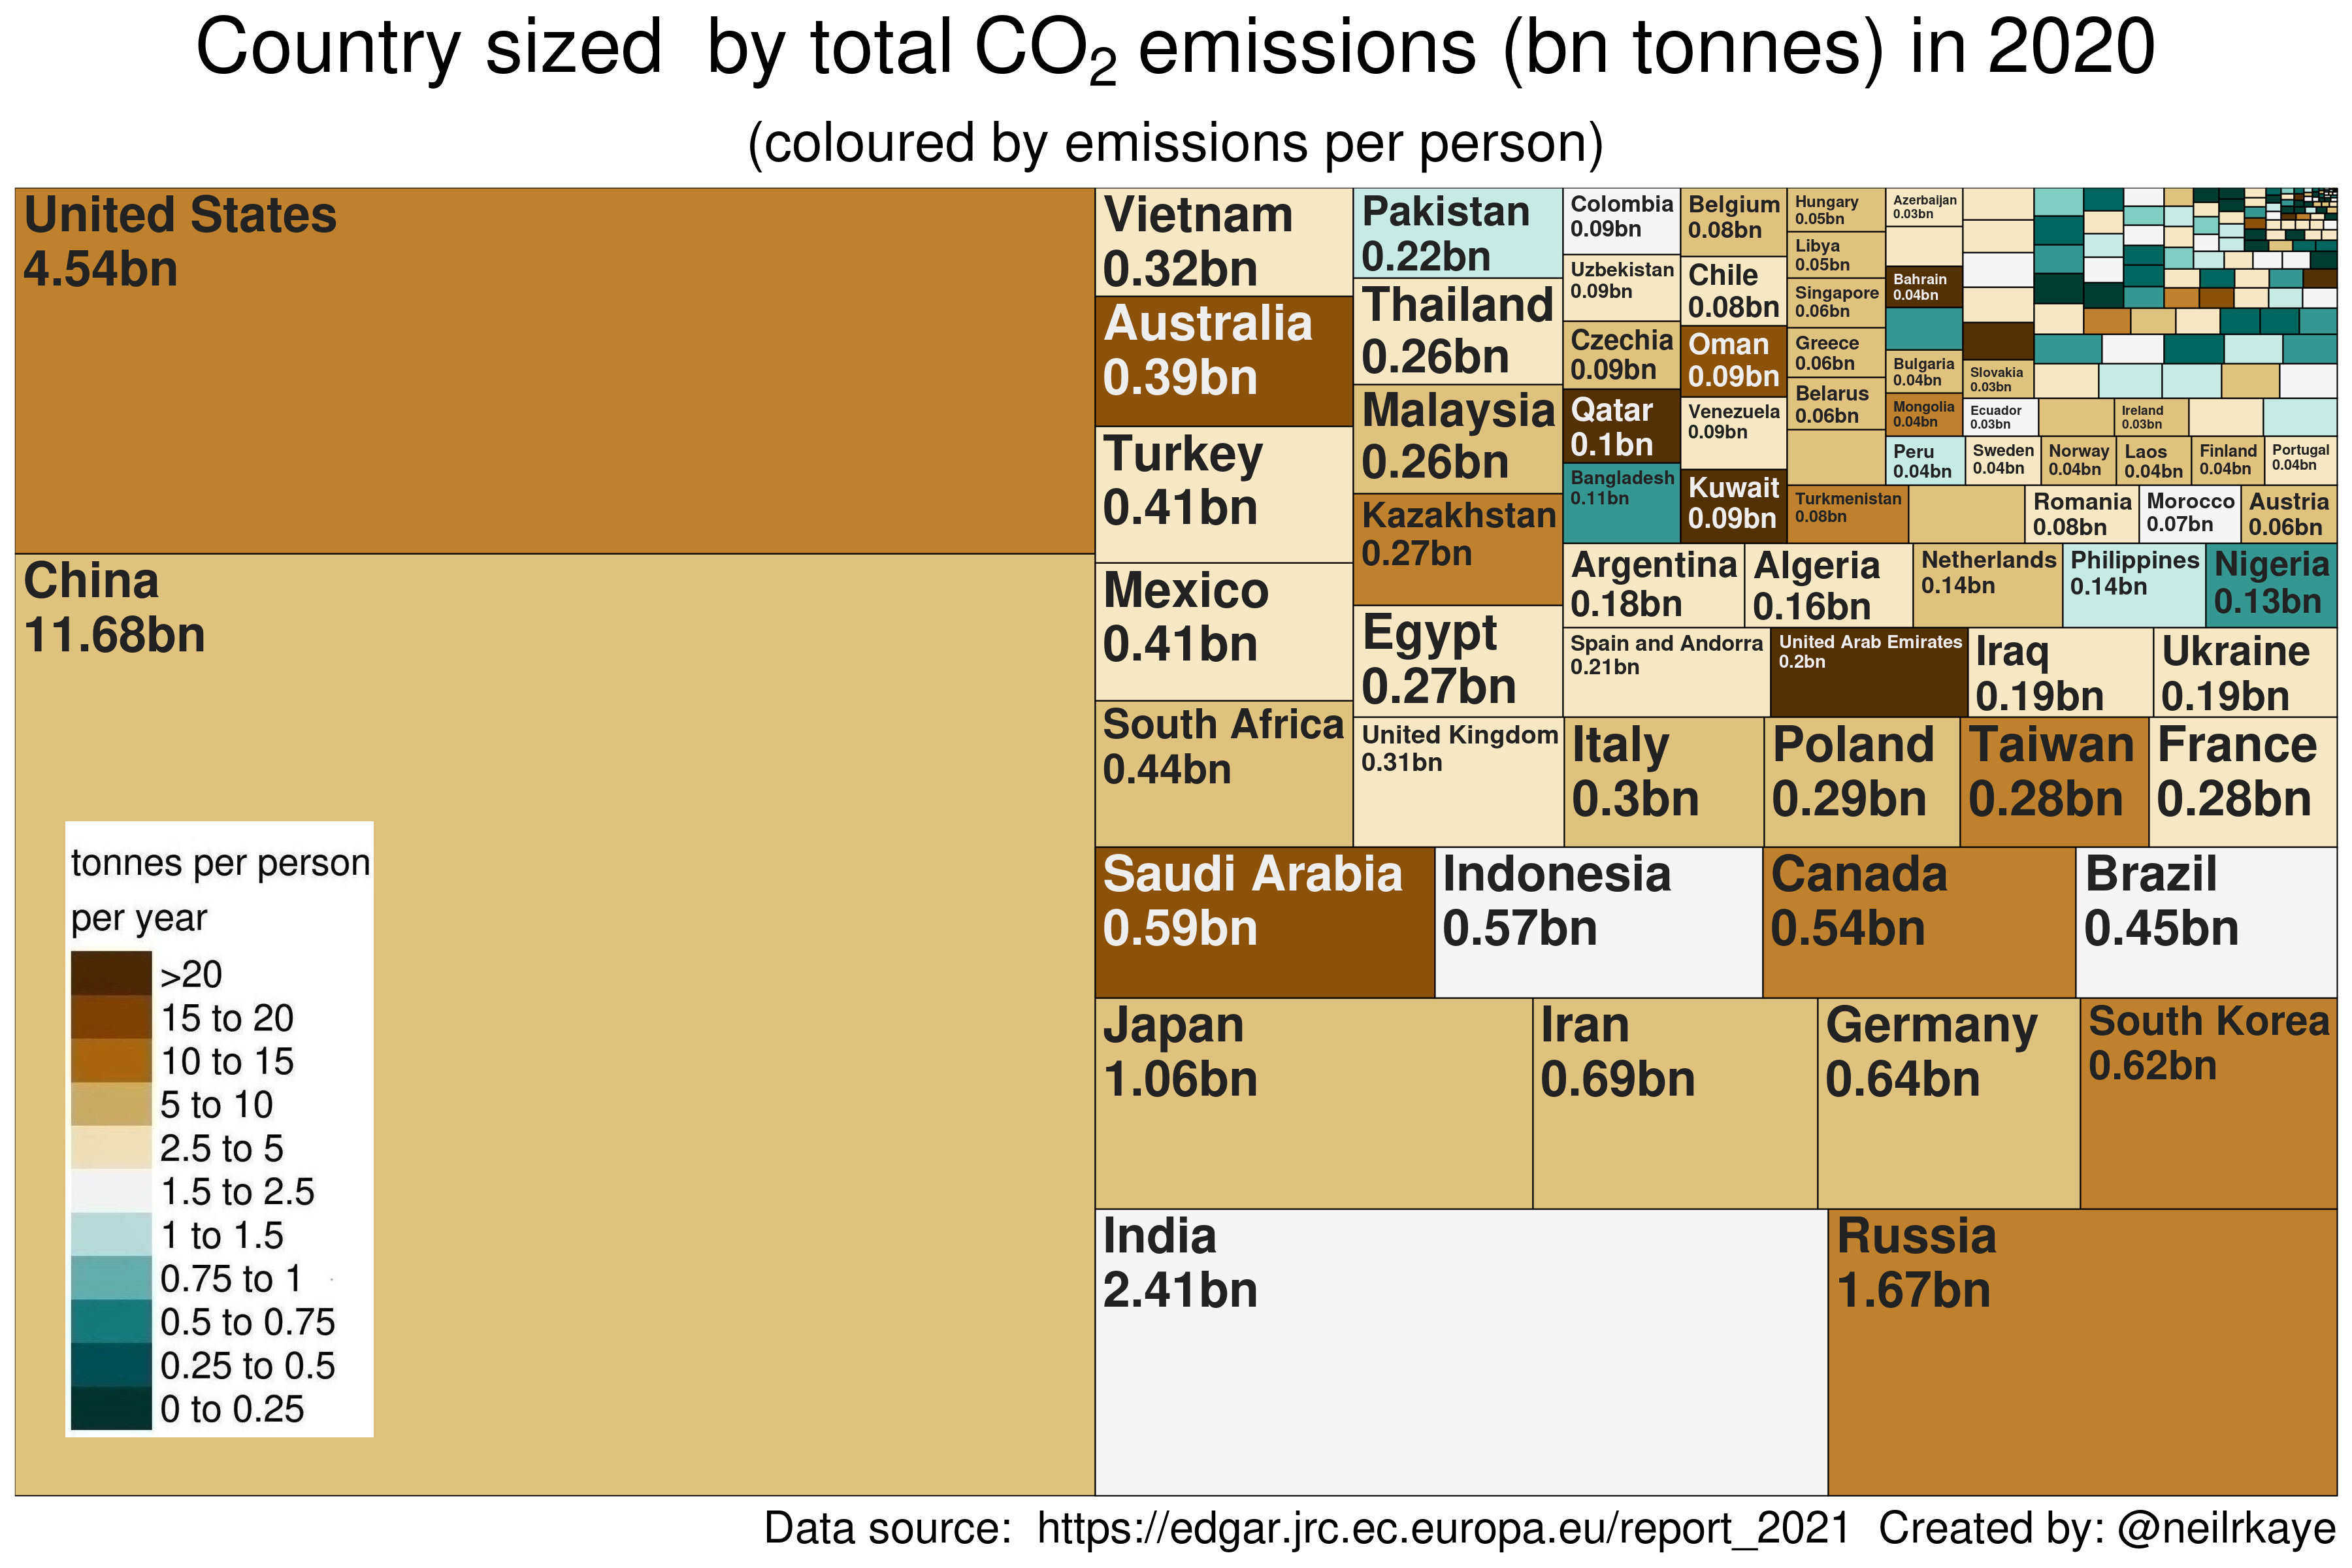 Countries scaled by CO₂ emissions